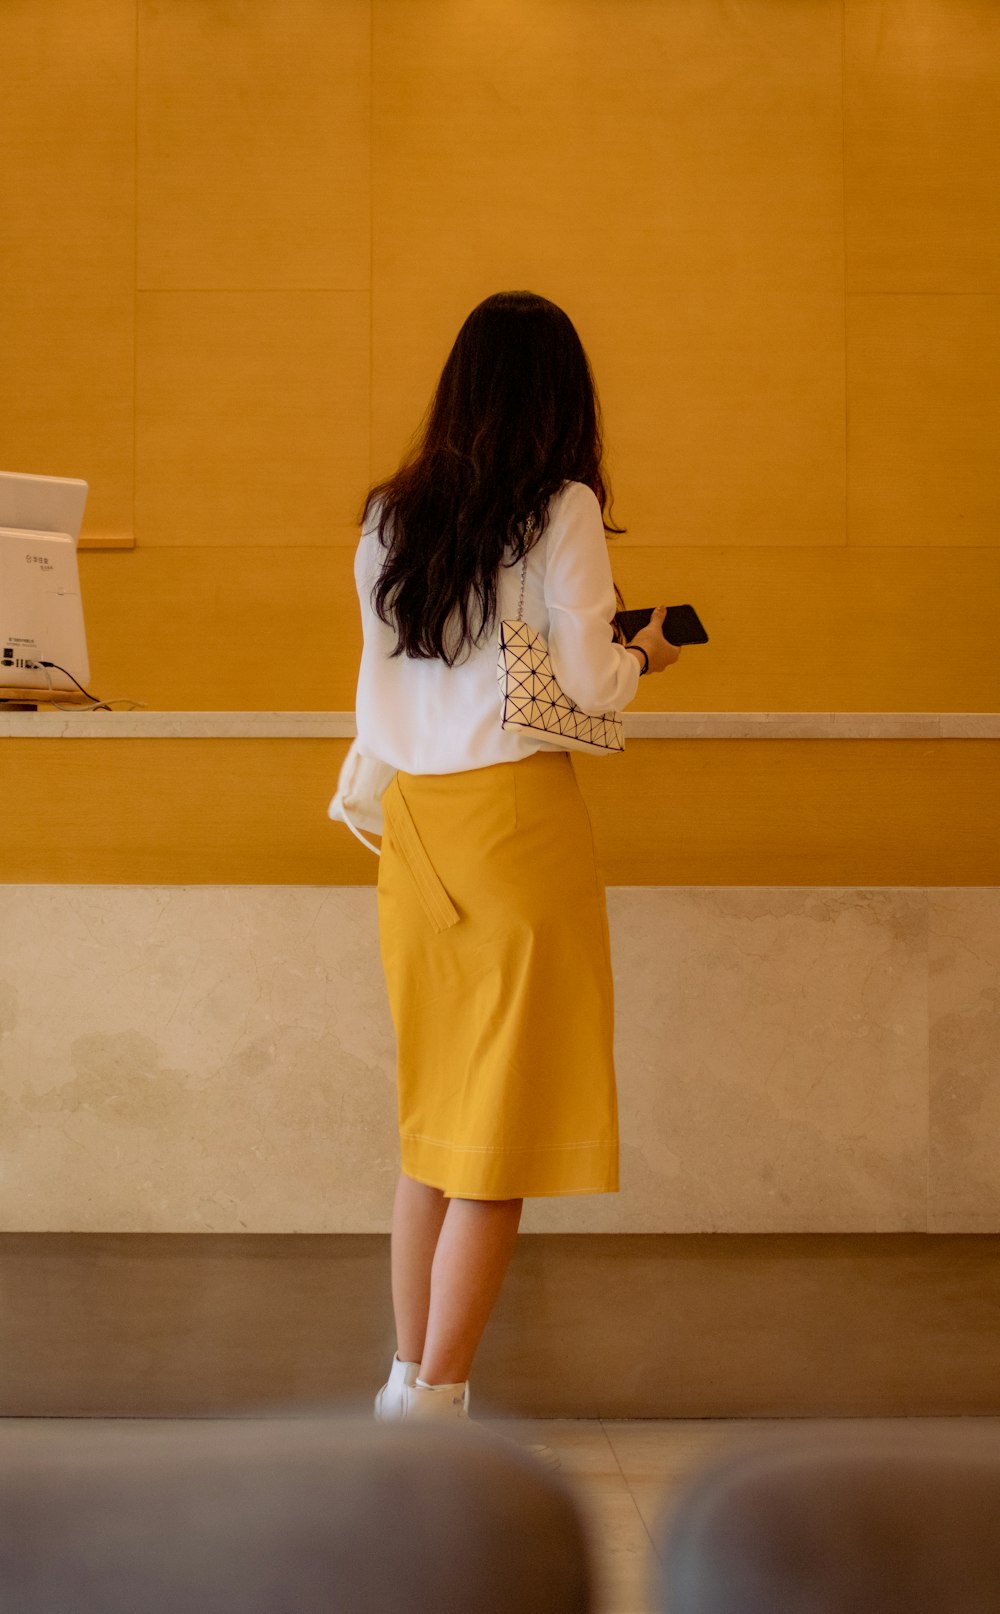 woman wearing white long-sleeved shirt and yellow skirt